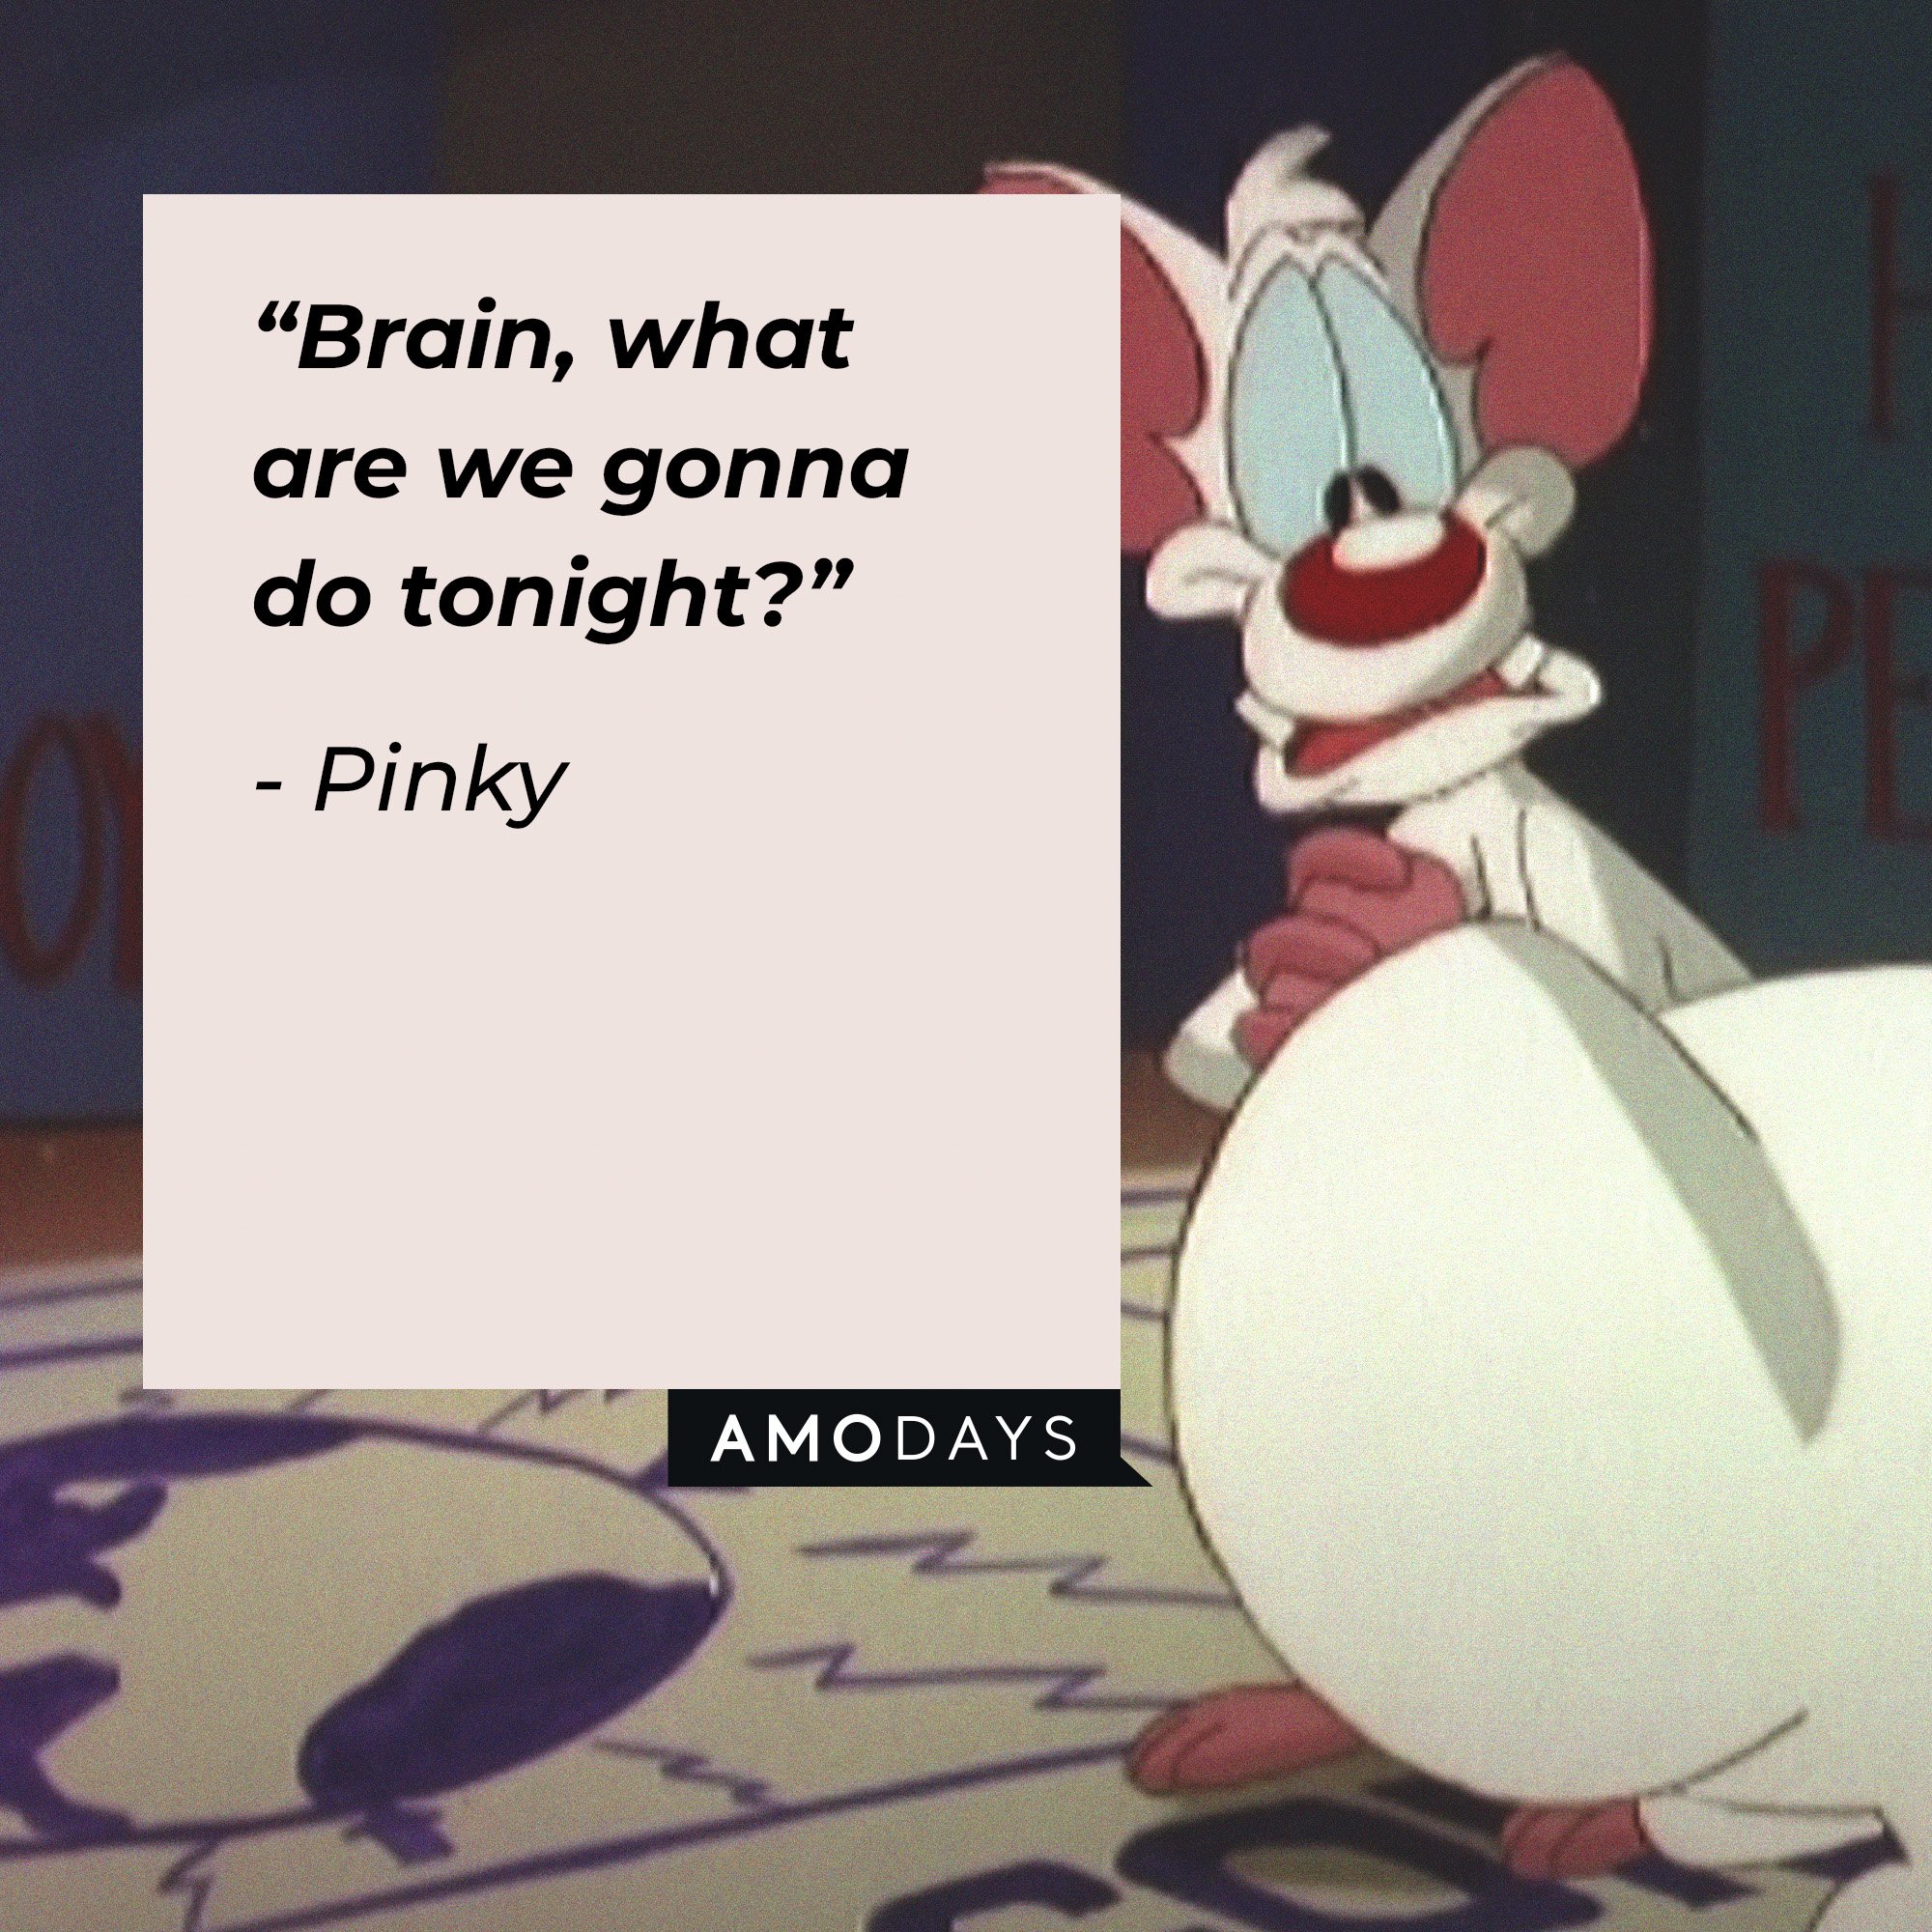  Pinky's quote: “Brain, what are we gonna do tonight?” | Image: AmoDays